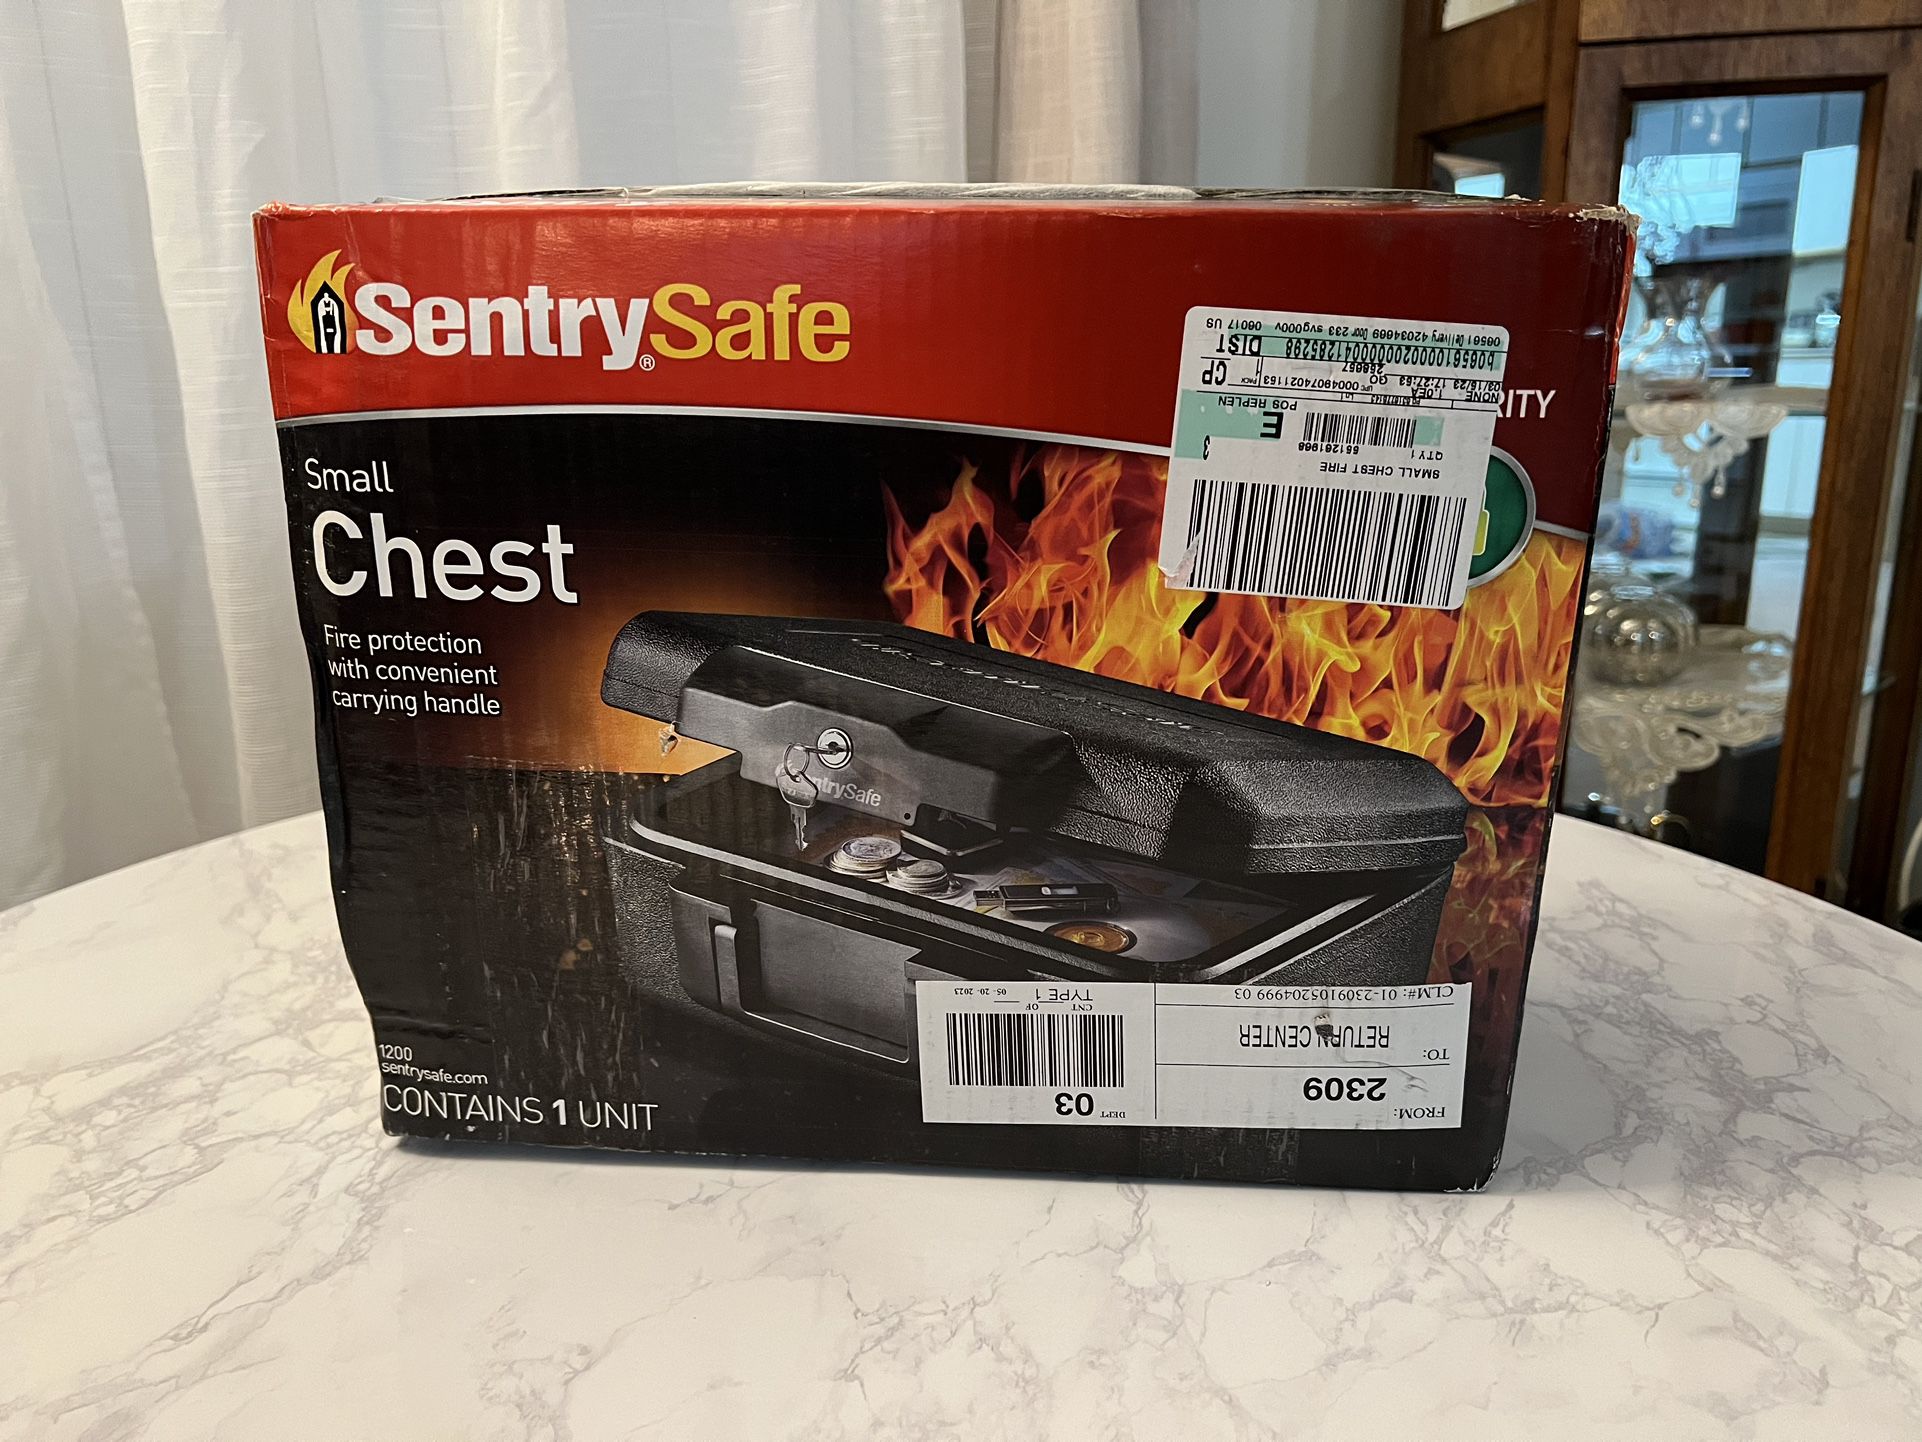 Sentrysafe Small Fire/Security Chest - Item still sealed in package